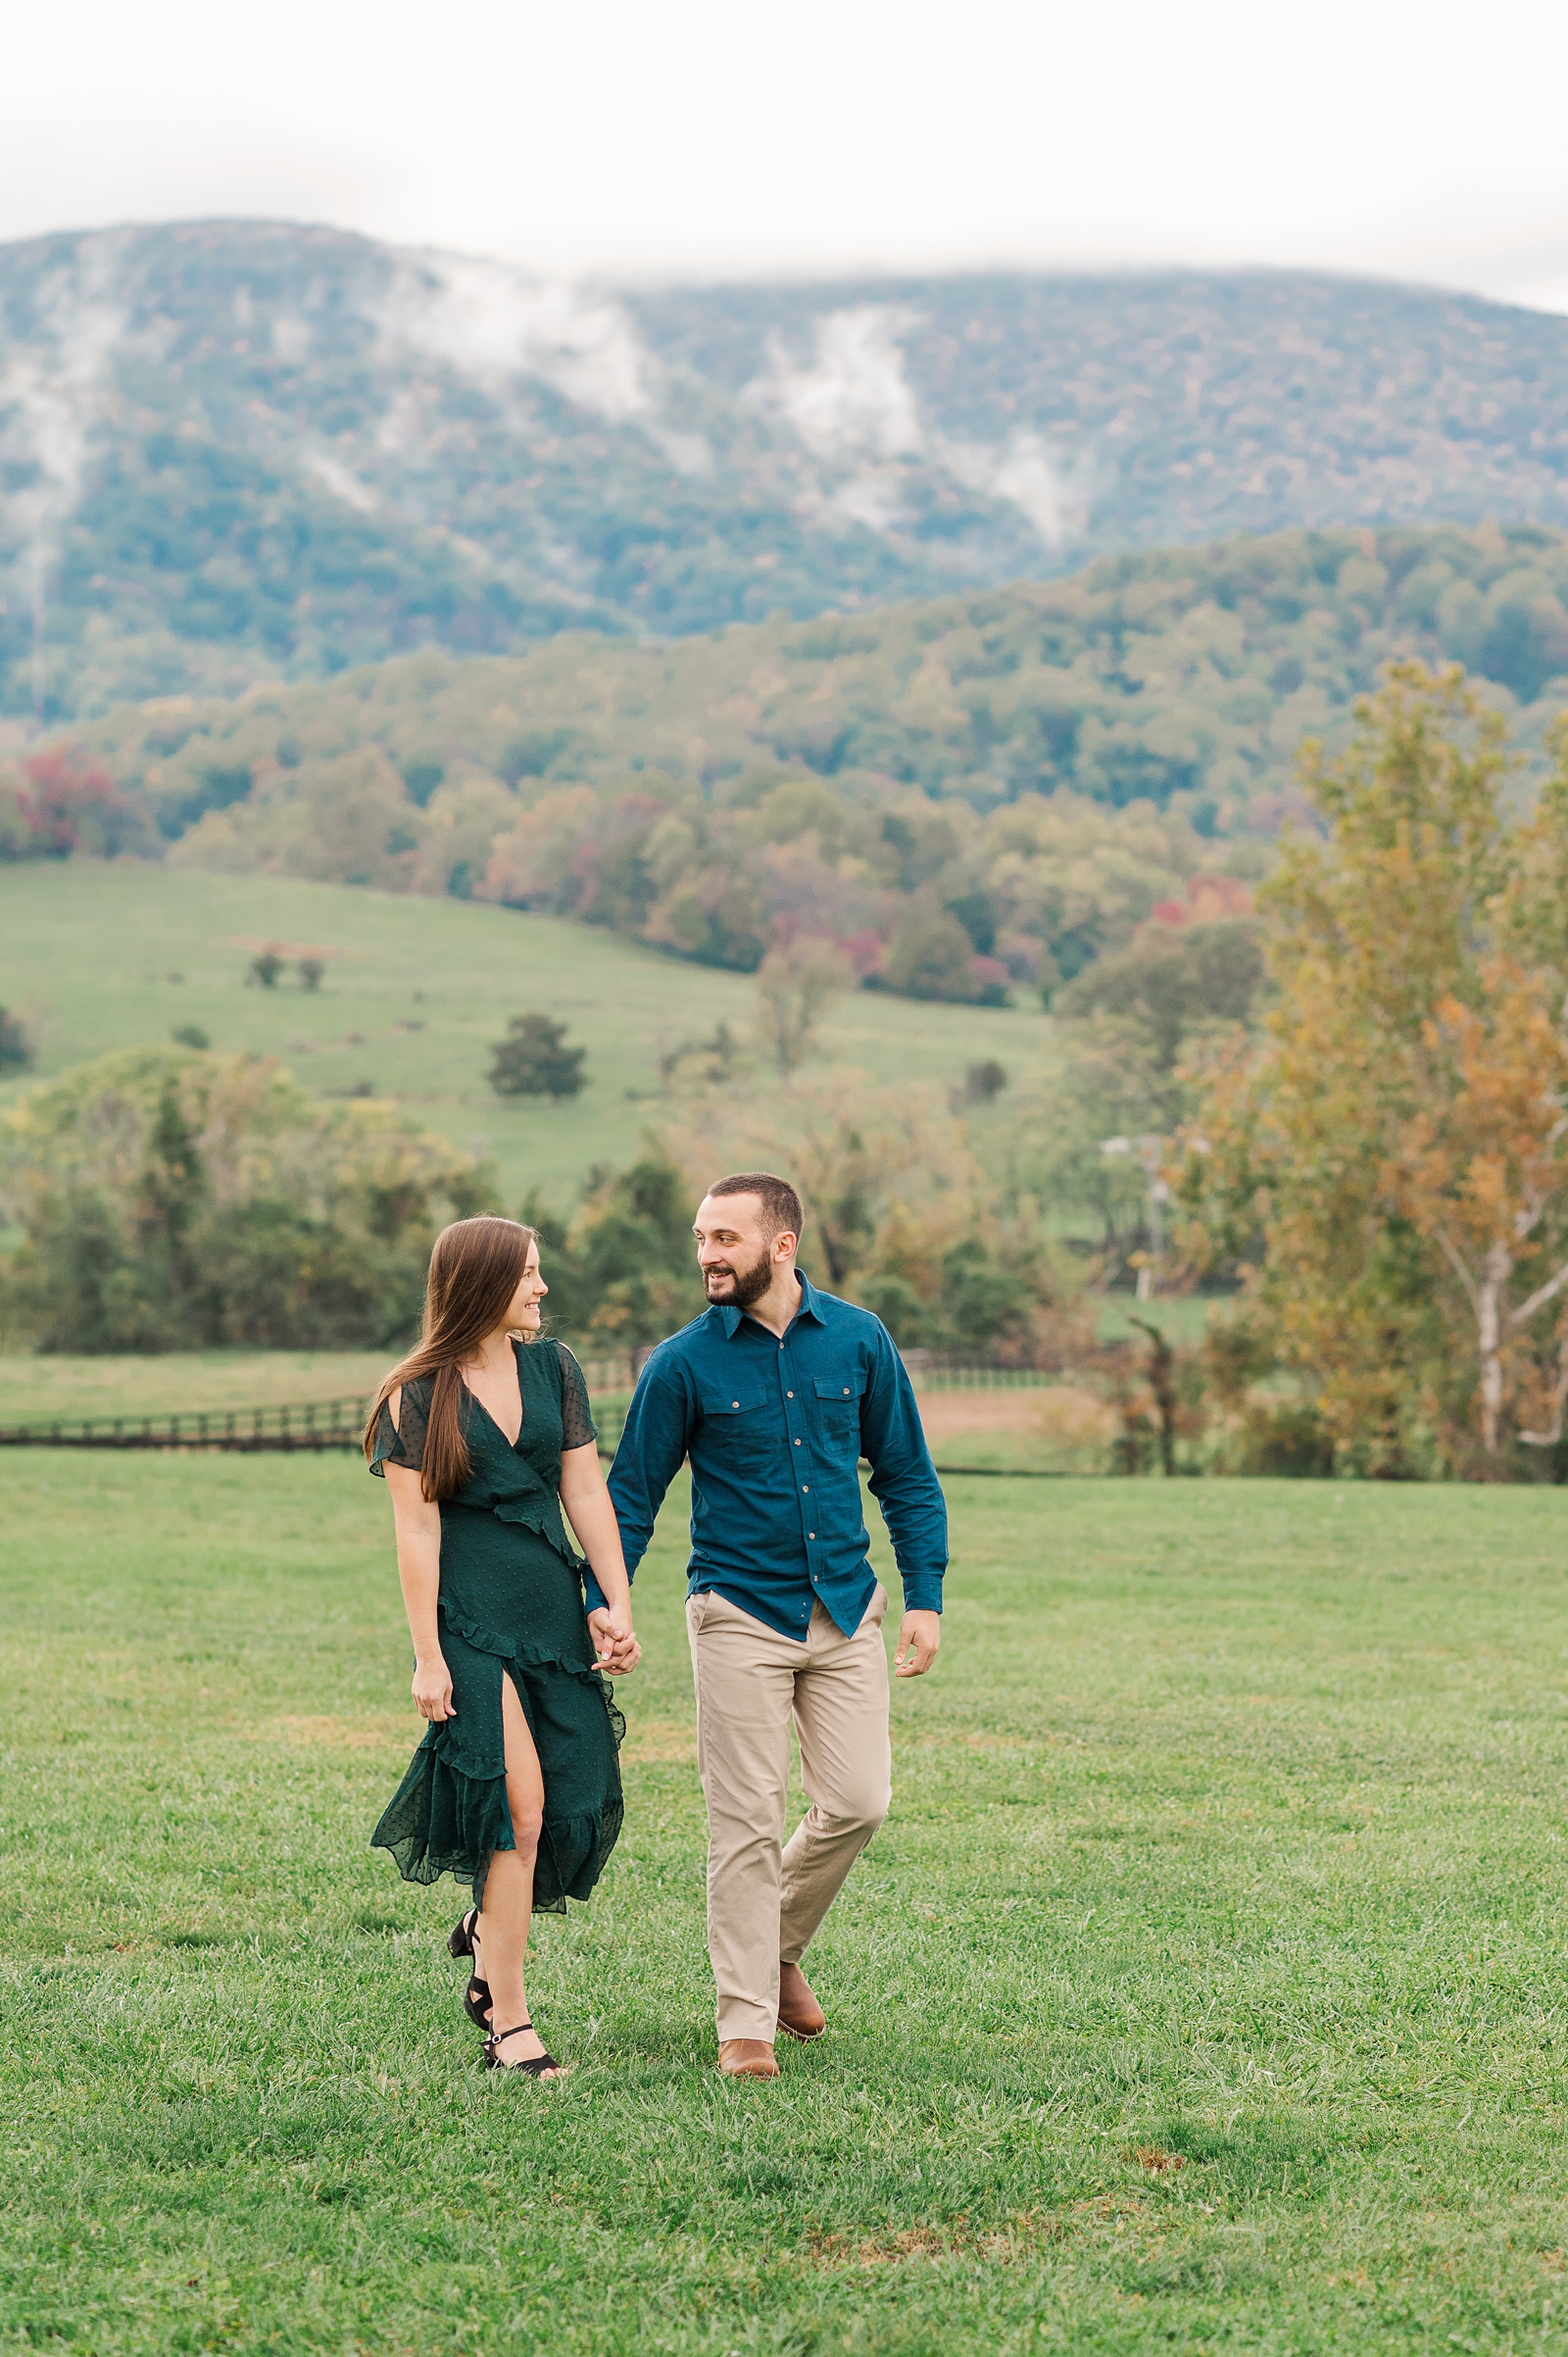 King Family Vineyards Engagement Session Location with Mountain Views. Richmond Wedding Photographer Kailey Brianne Photography 